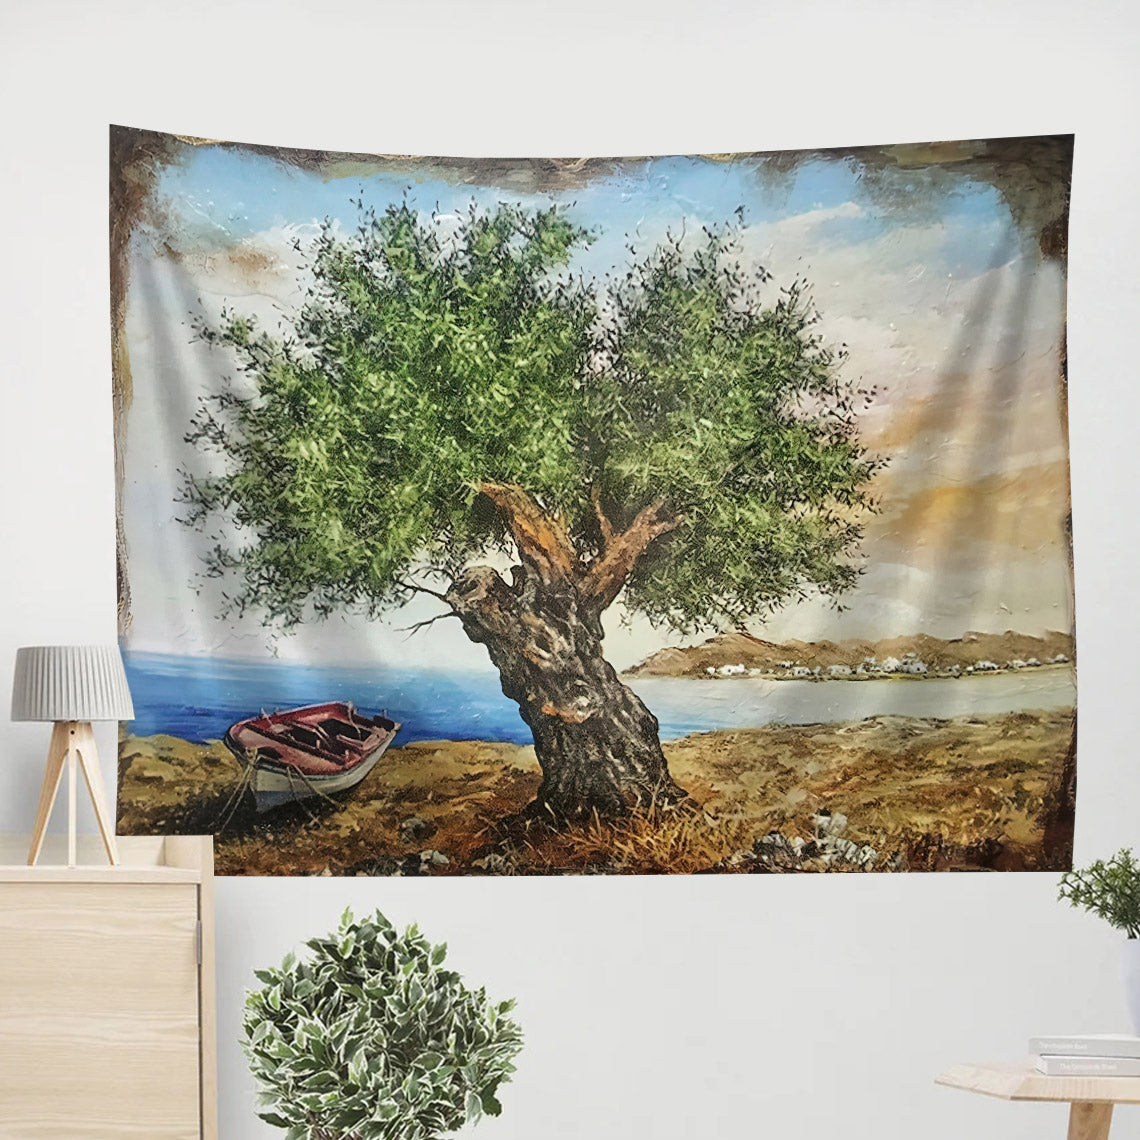 Olive Tree On Wood Painting Tapestry - Tapestry Wall Decor - Home Decor Living Room